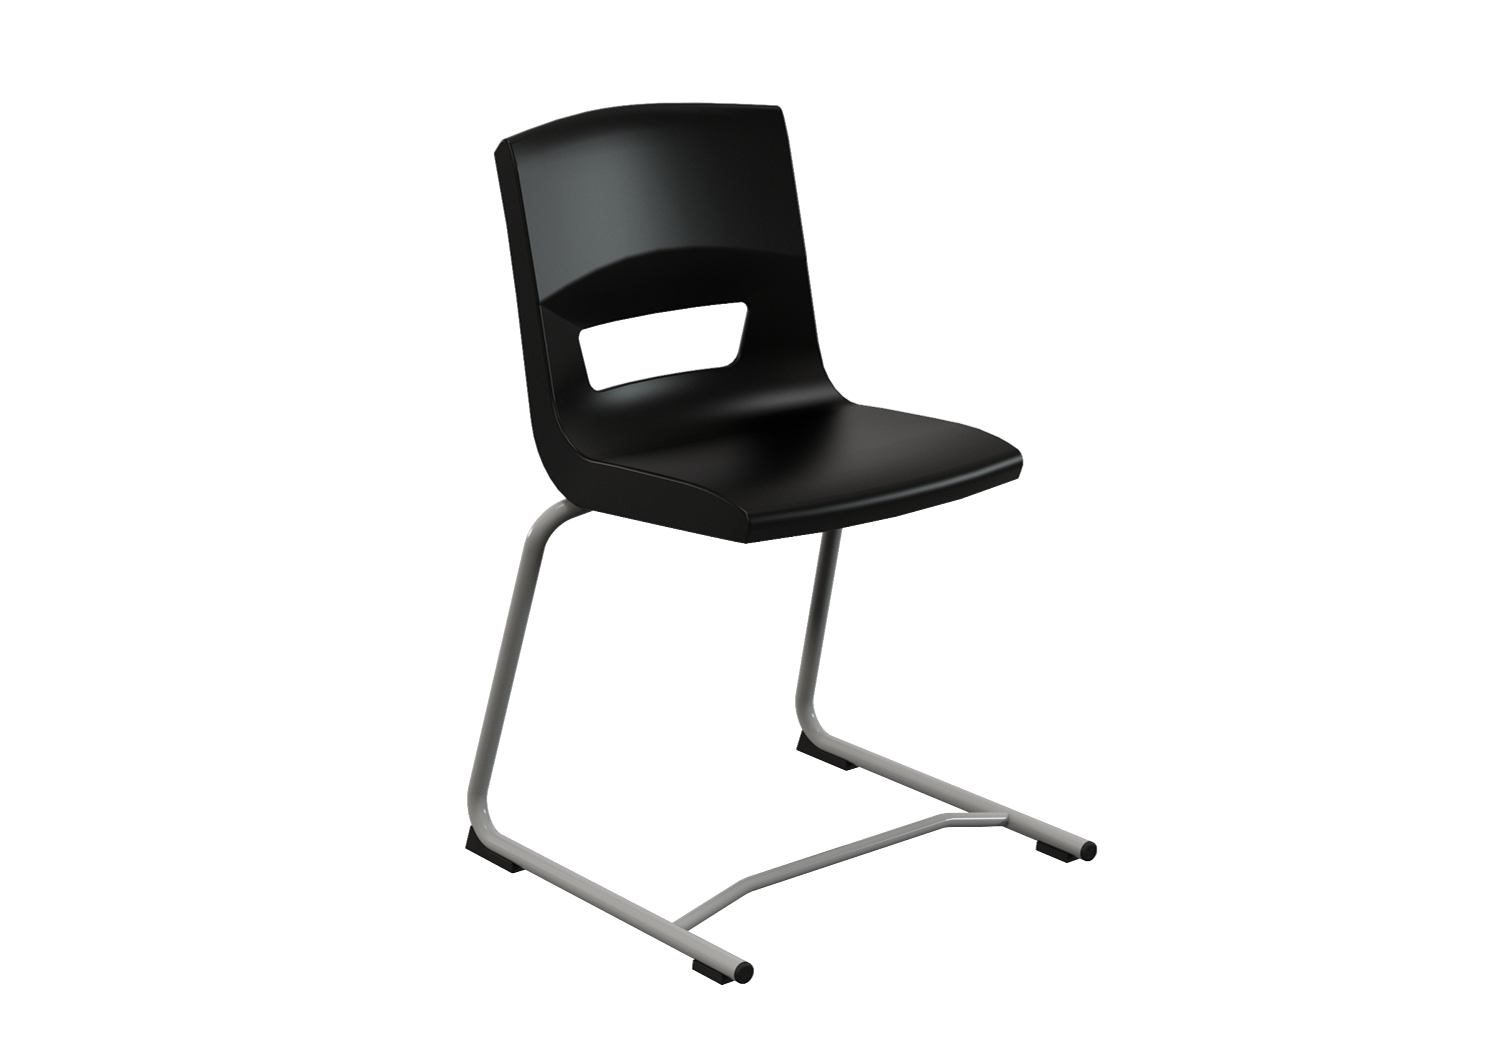 Postura reverse cantilever chair for classrom and kitchen in jet black